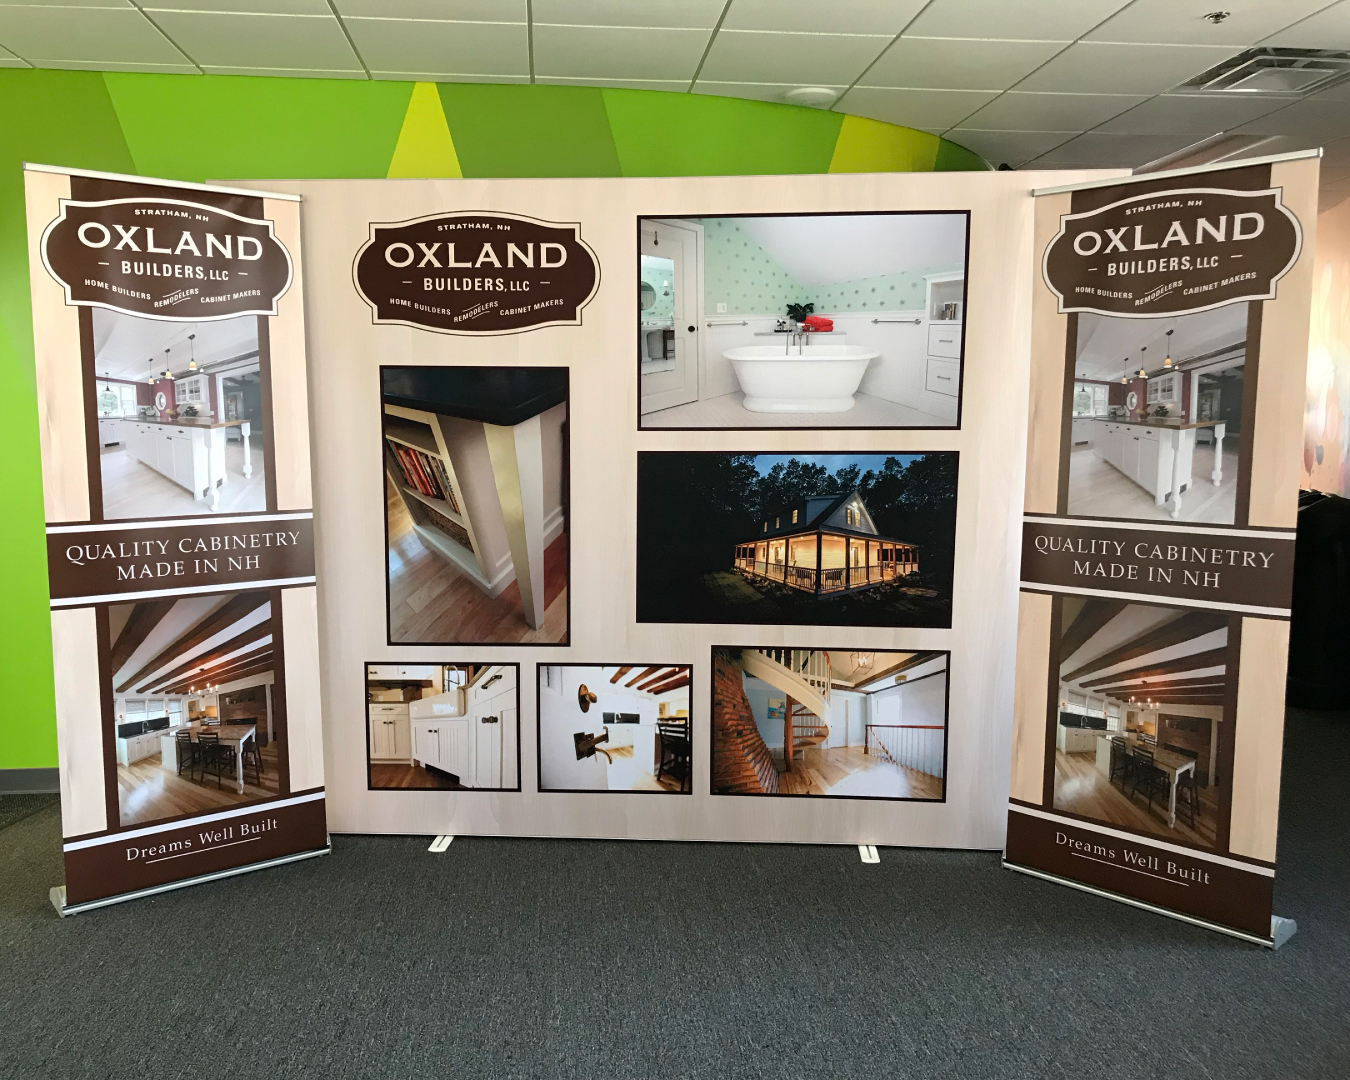 Oxland Tradeshow Booth printed and designed by Alphagraphics Portsmouth